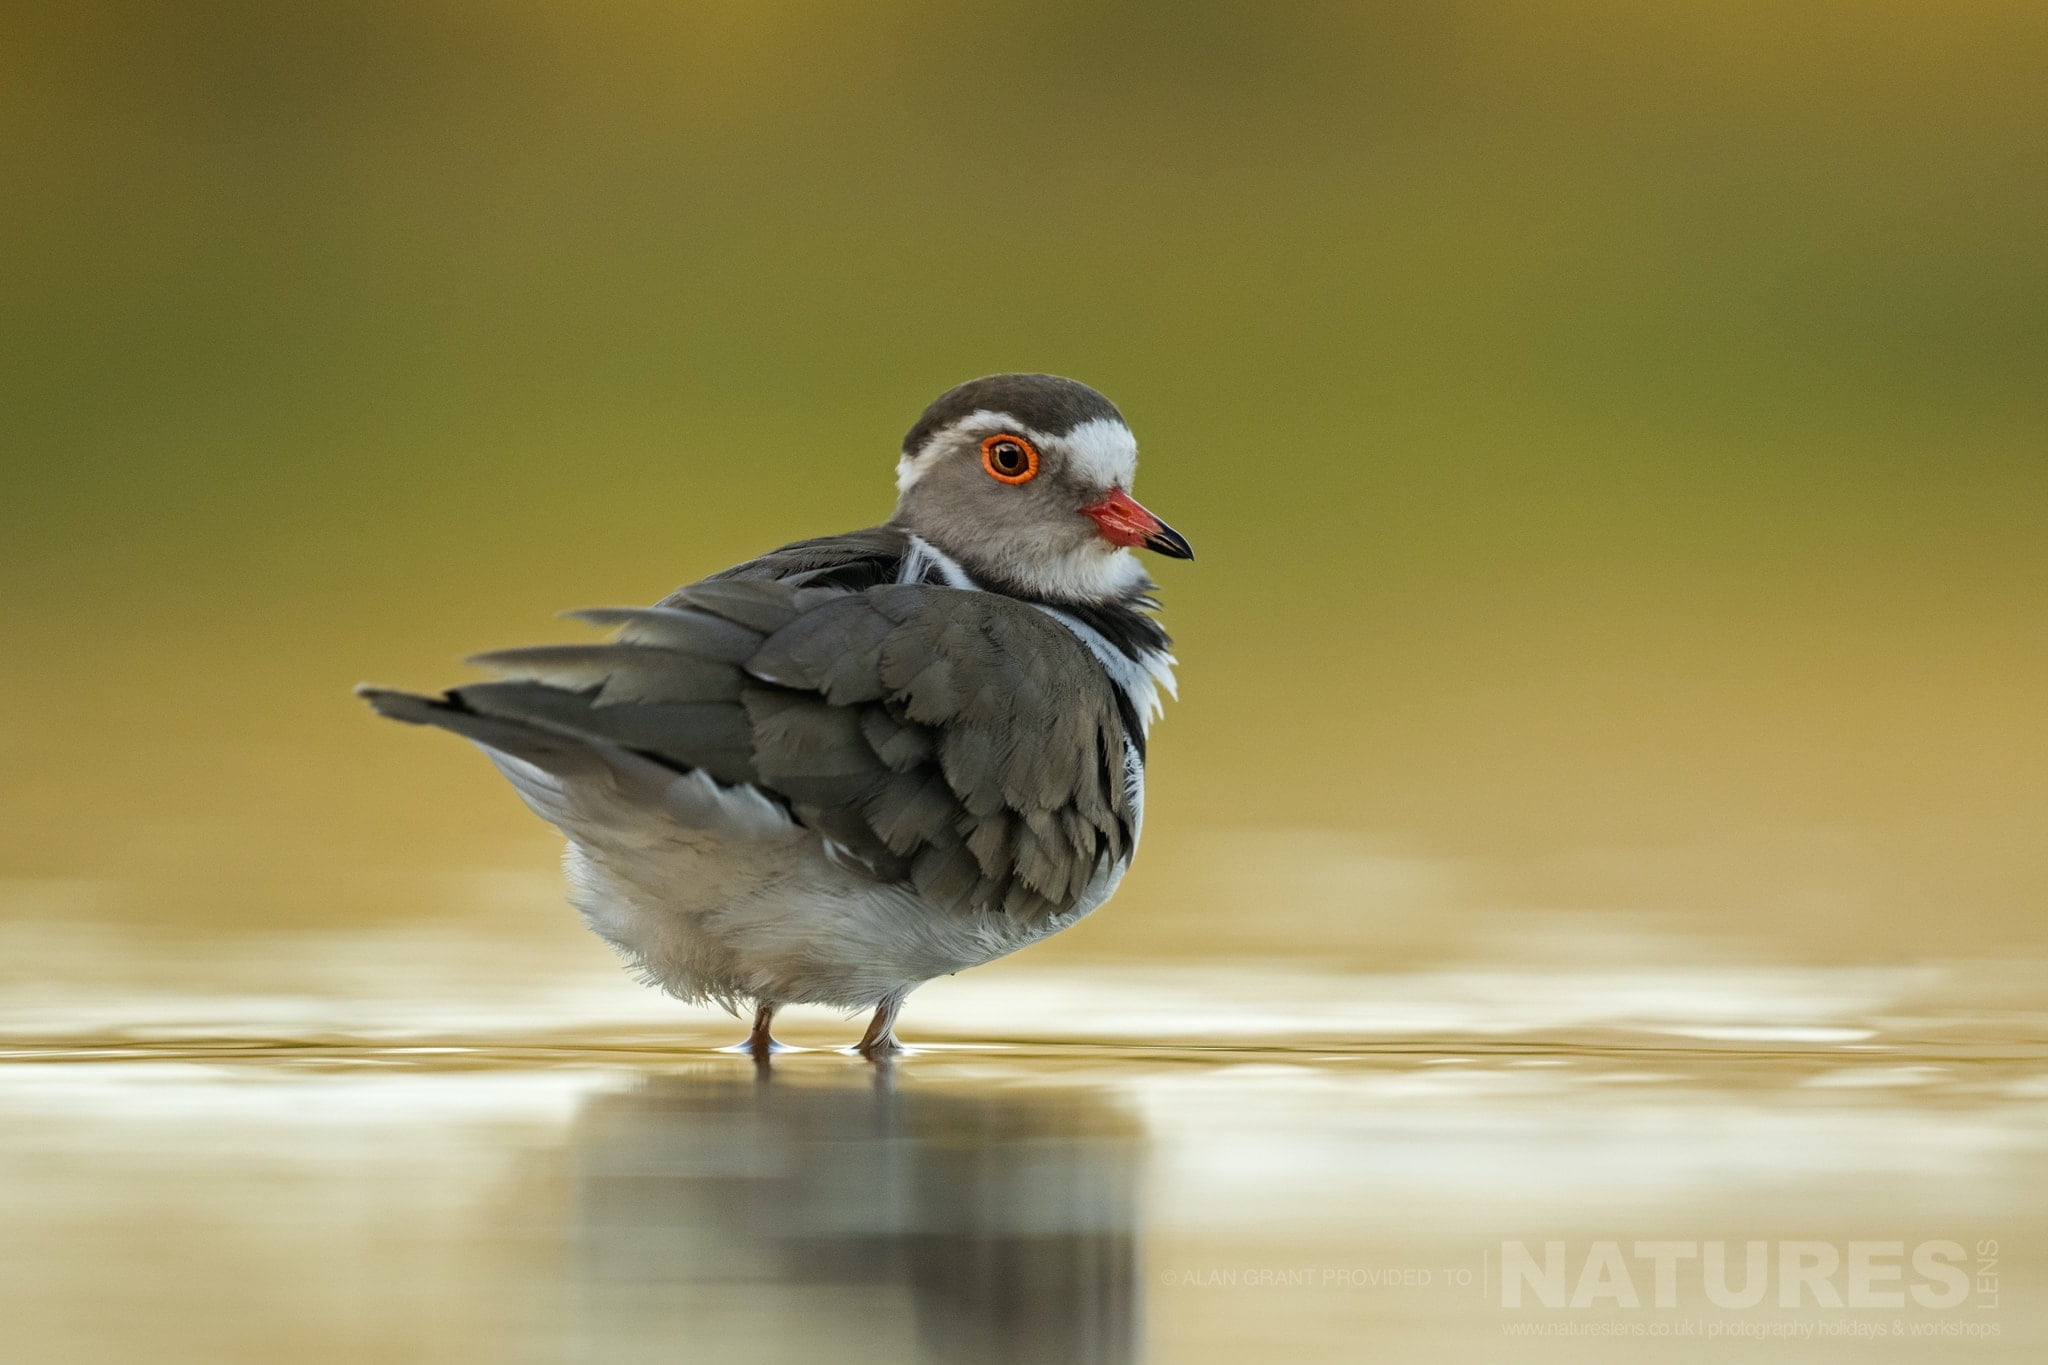 A colourful portrait of a Three banded Plover as captured during the NaturesLens Zimanga photography safari